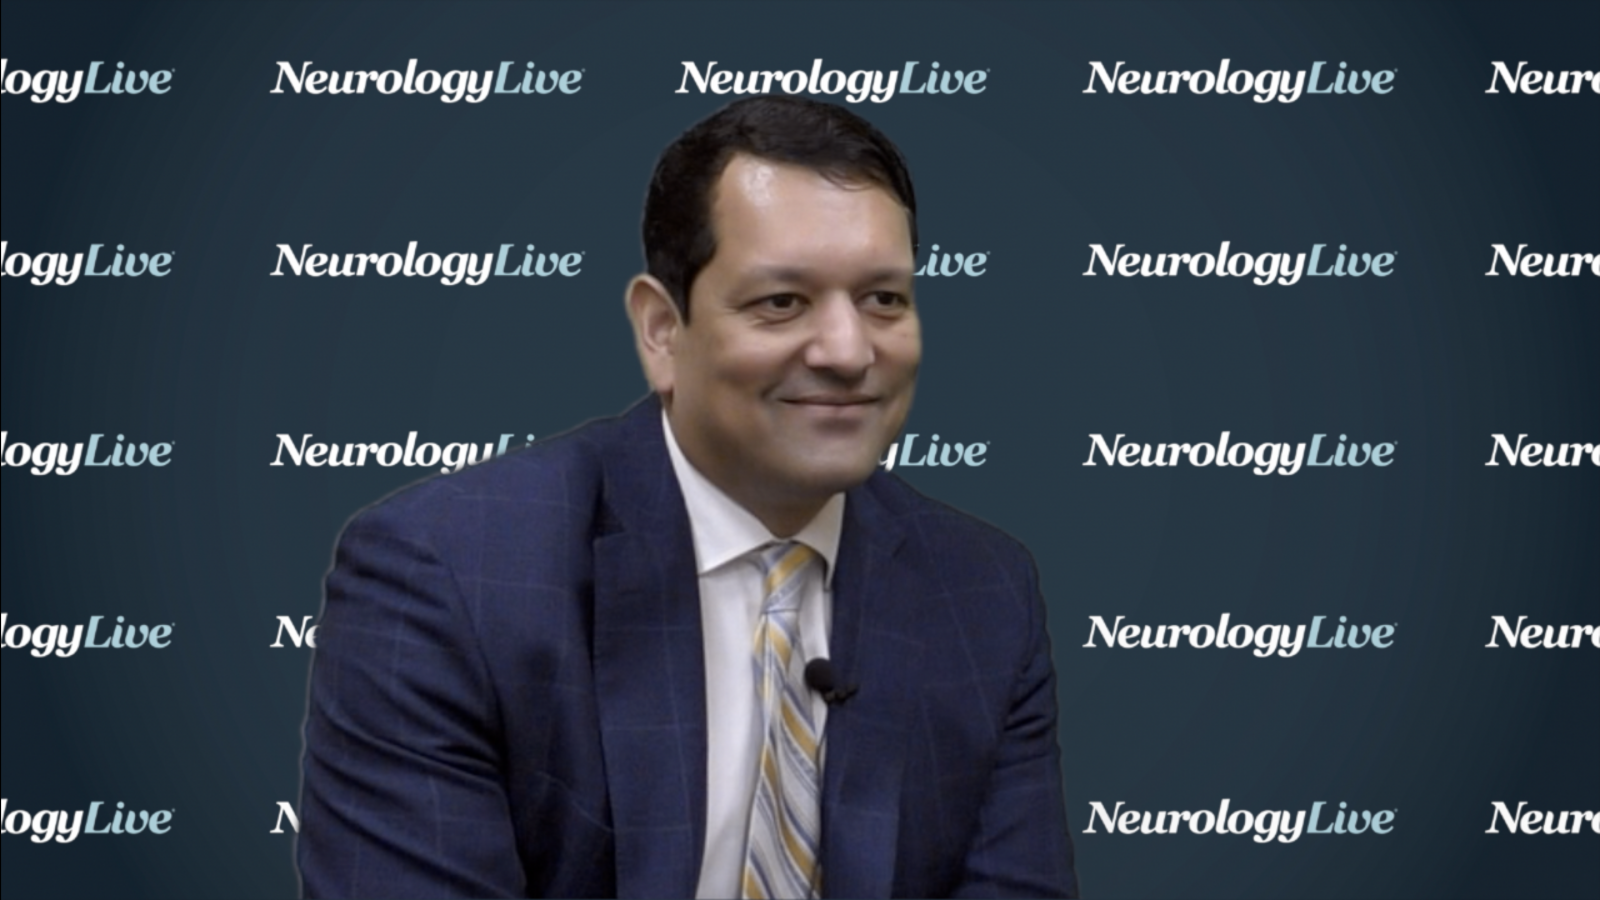 Amit Rakhit, MD, MBA: Measuring Improvement in Fragile X Syndrome, Other Rare Conditions